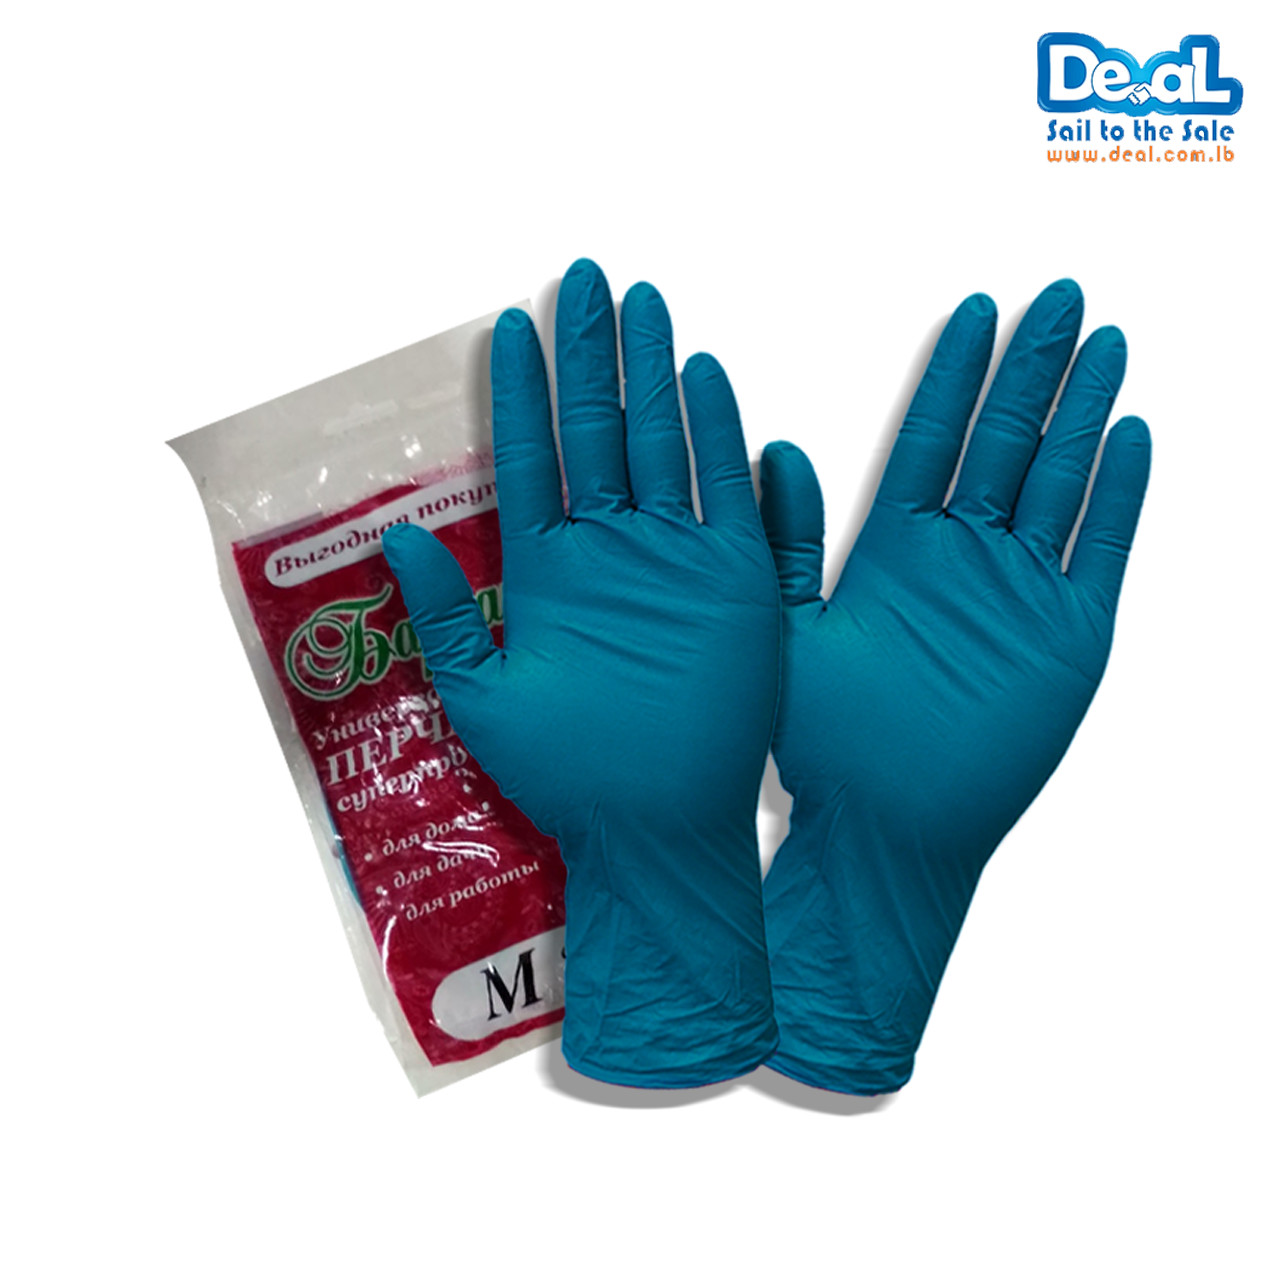 Medium Size High Quality Protective Deal Gloves